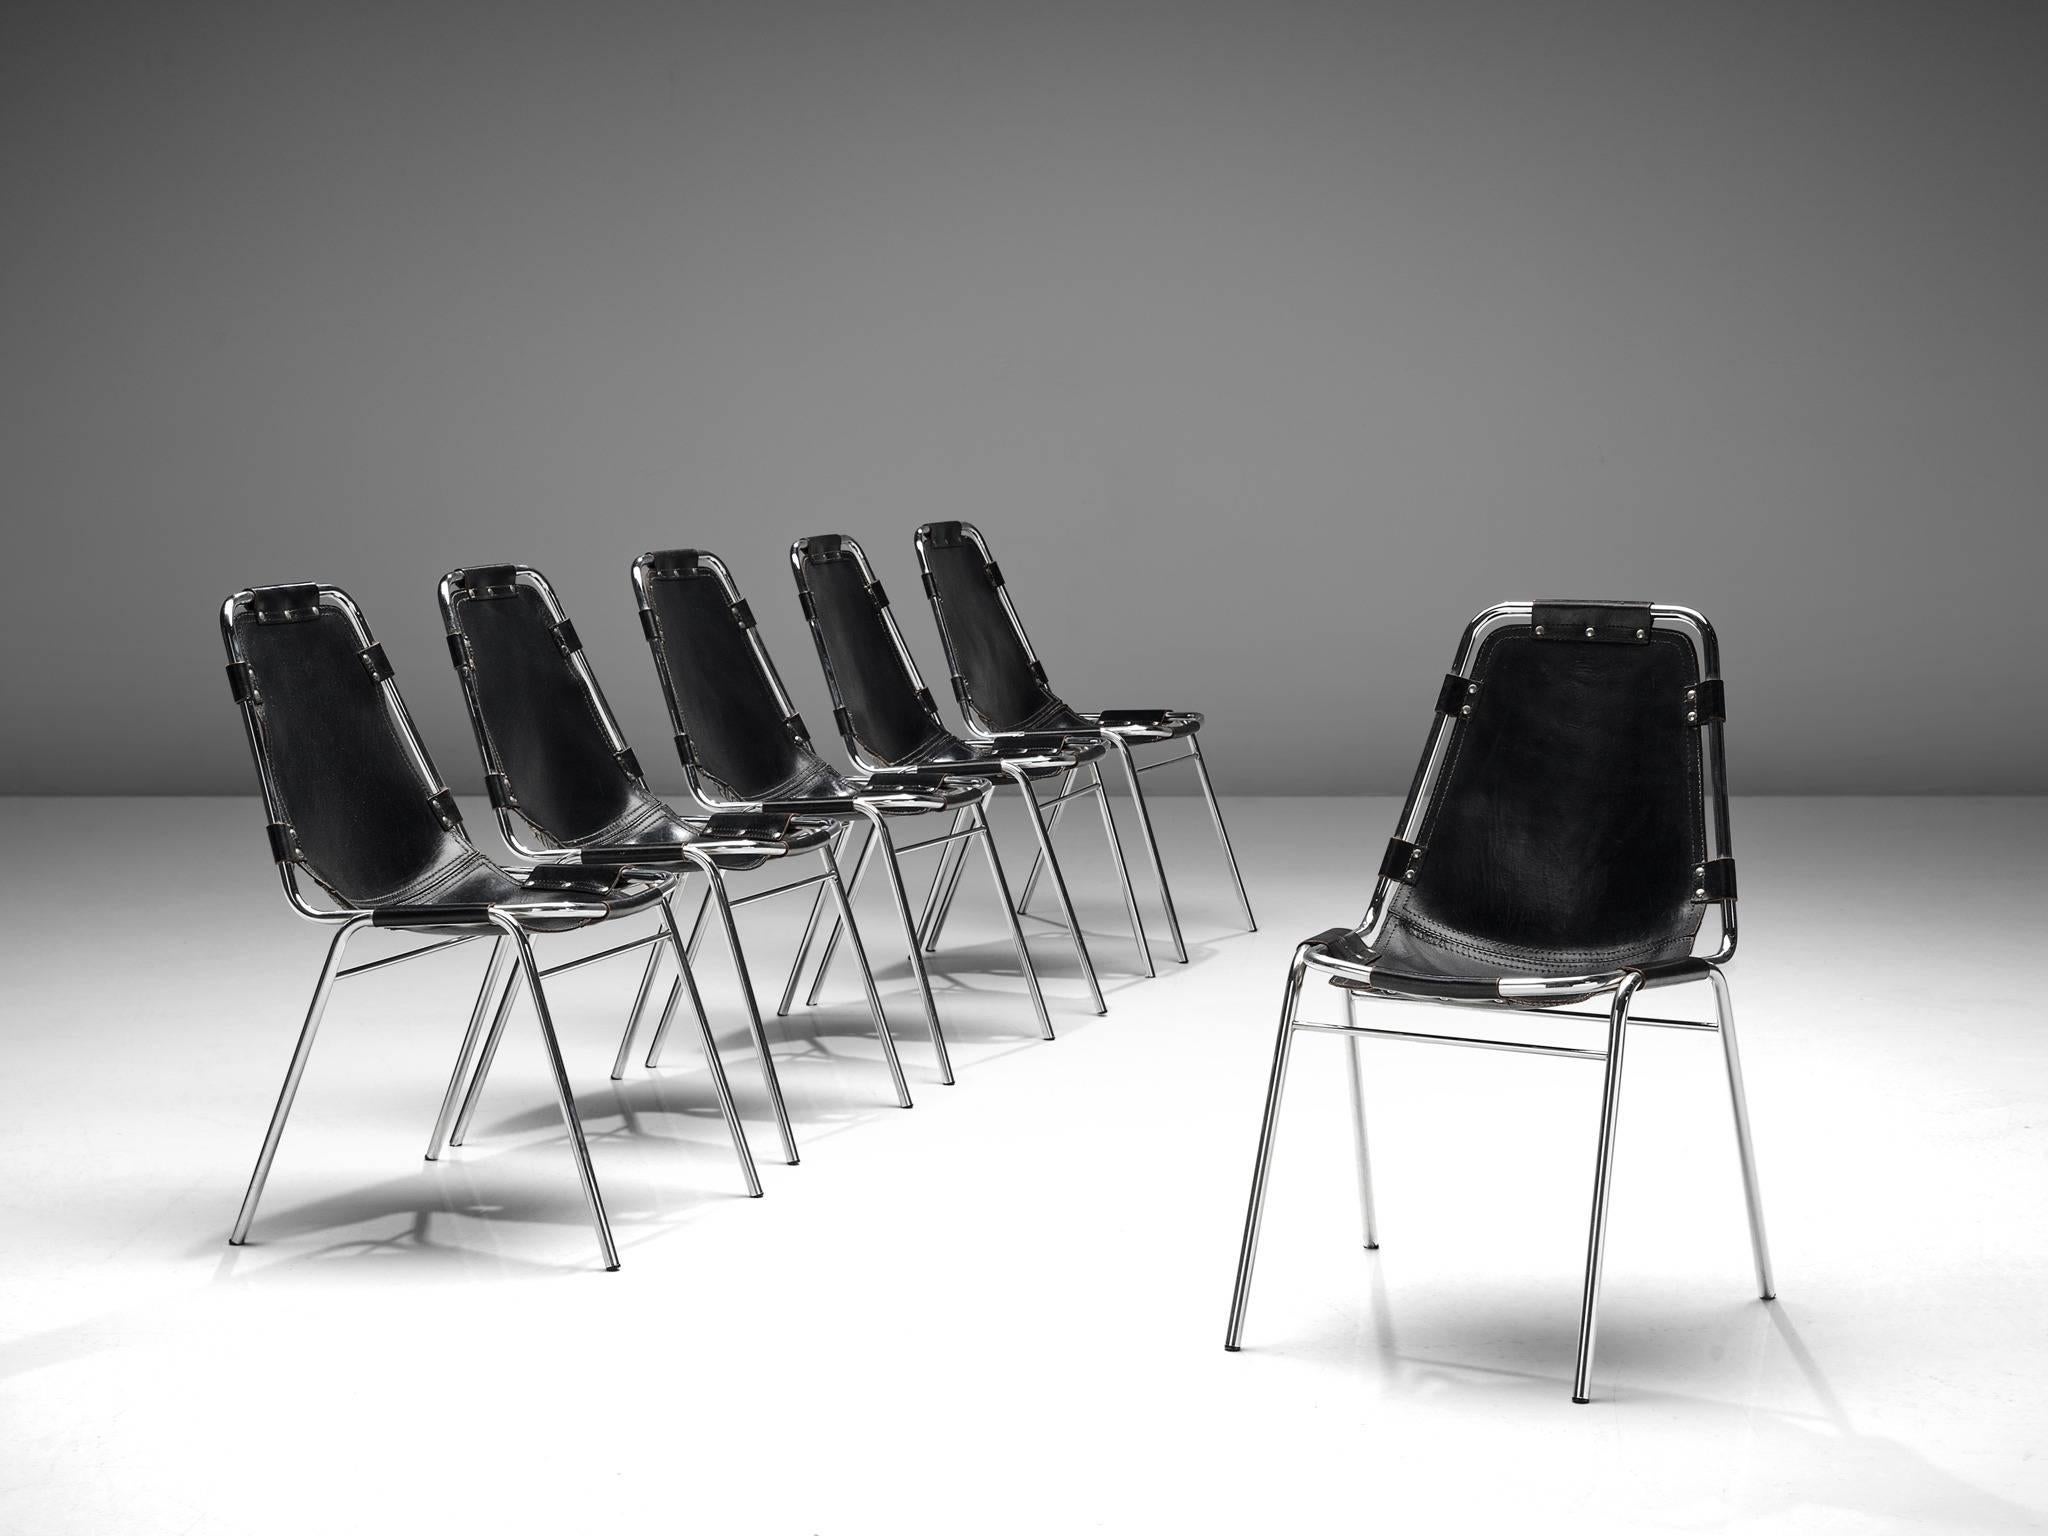 Set of six chairs, in steel and black leather, France, circa 1970s. 

Set of six chairs of the famous model 'Les Arcs.' The simplistic design consists of a tubular steel frame with a seating of thick black saddle leather. The natural leather makes